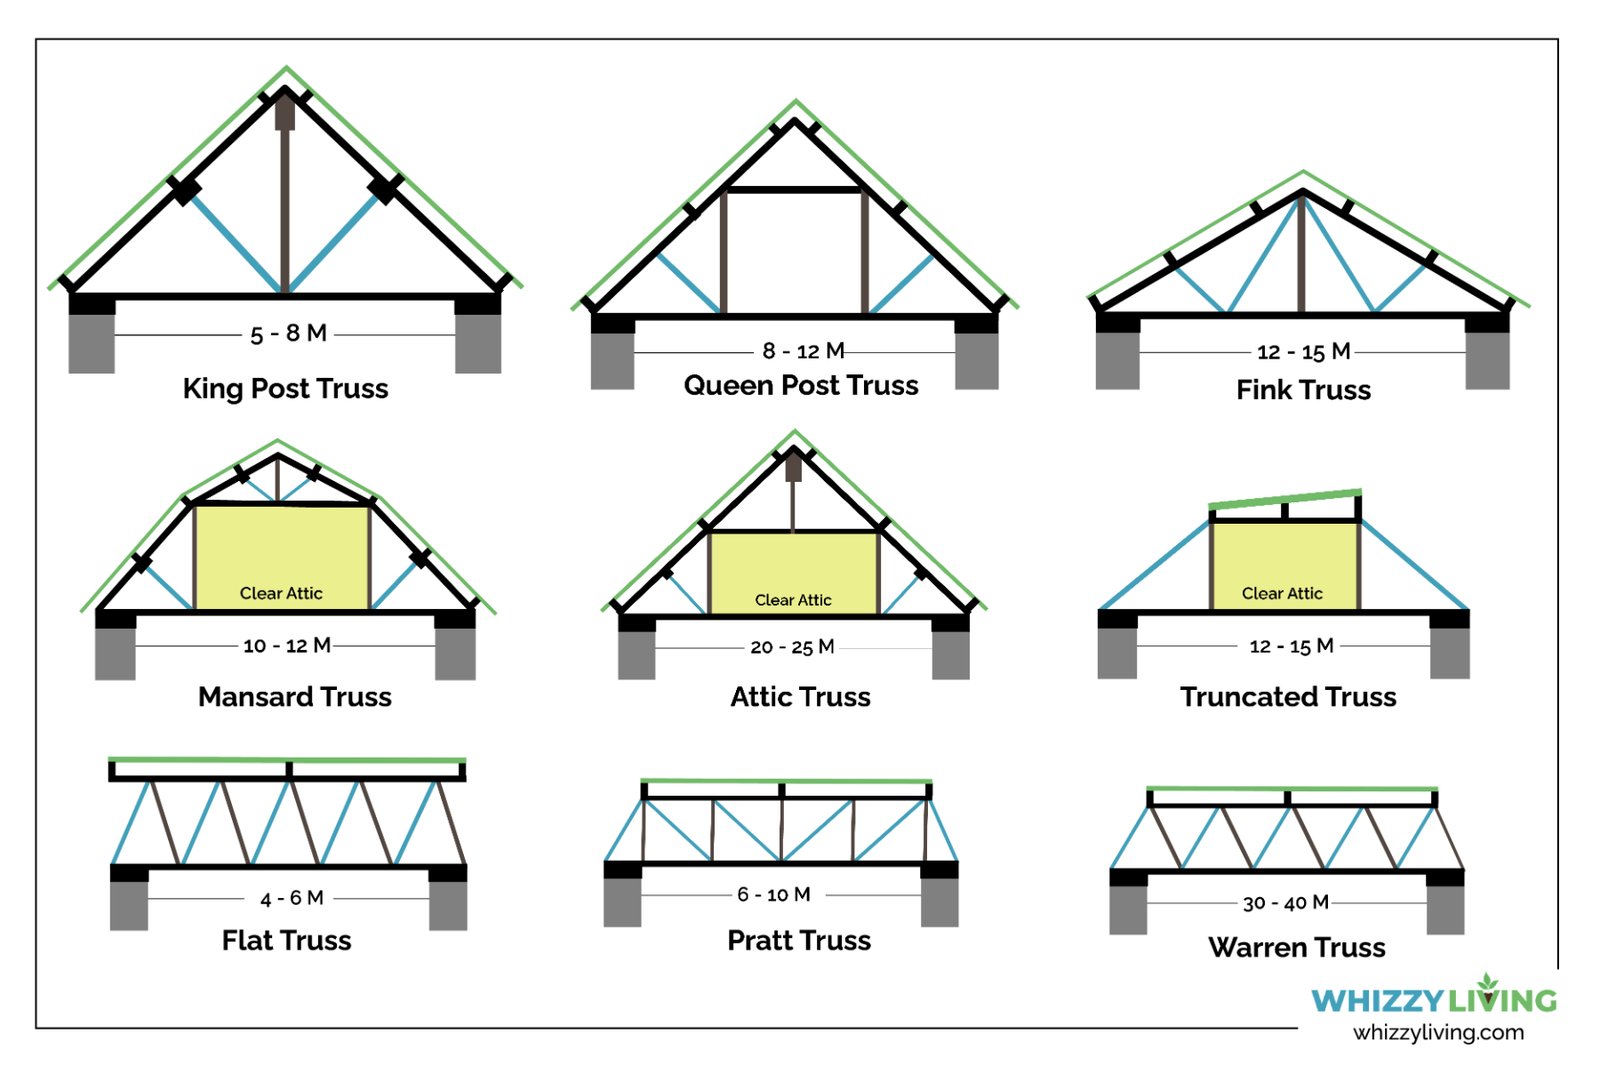 20 Types of Roof Trusses (Based on Design & Strength)